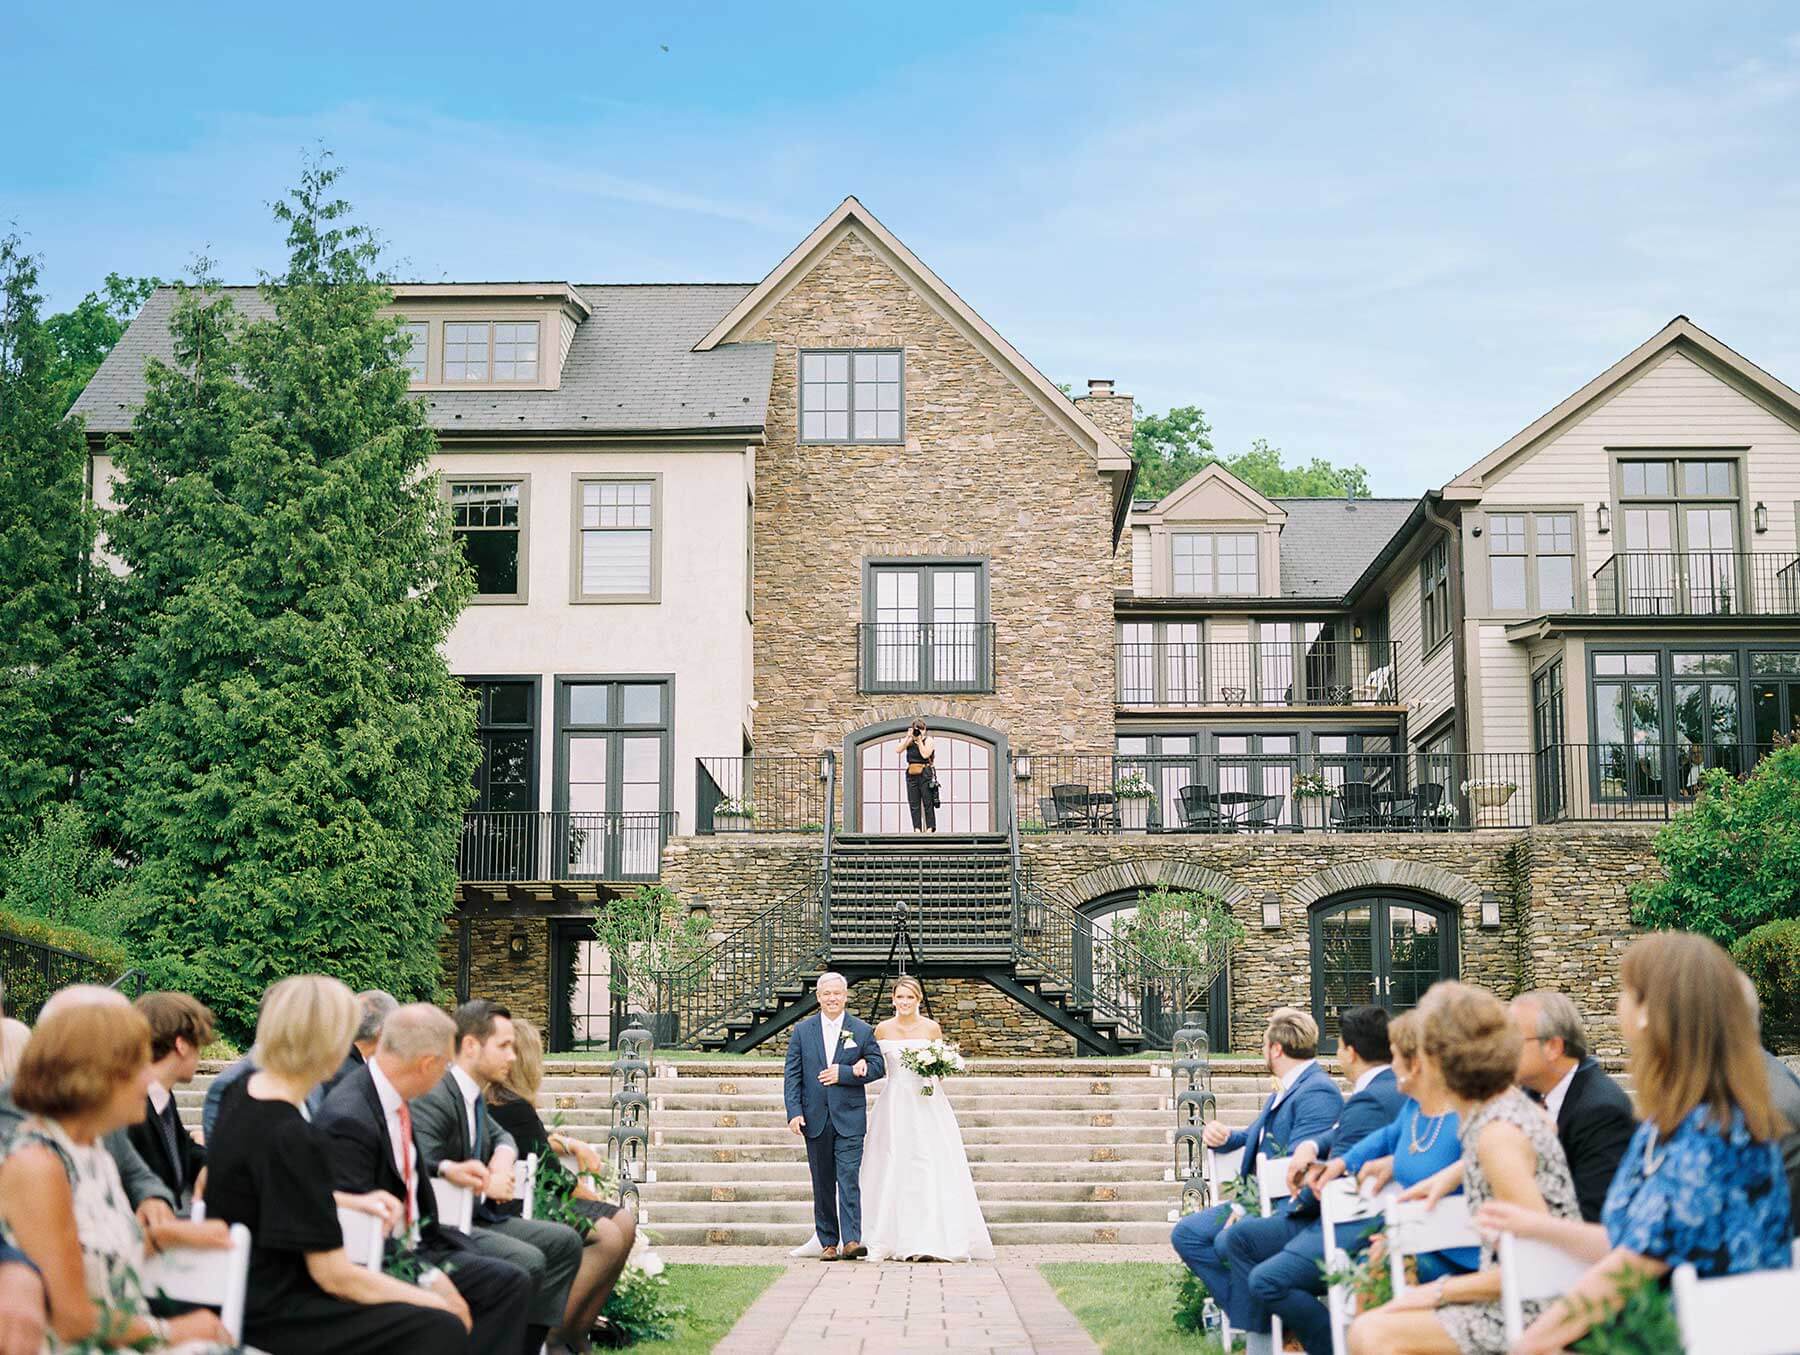 A wedding ceremony in front of a large mansion.